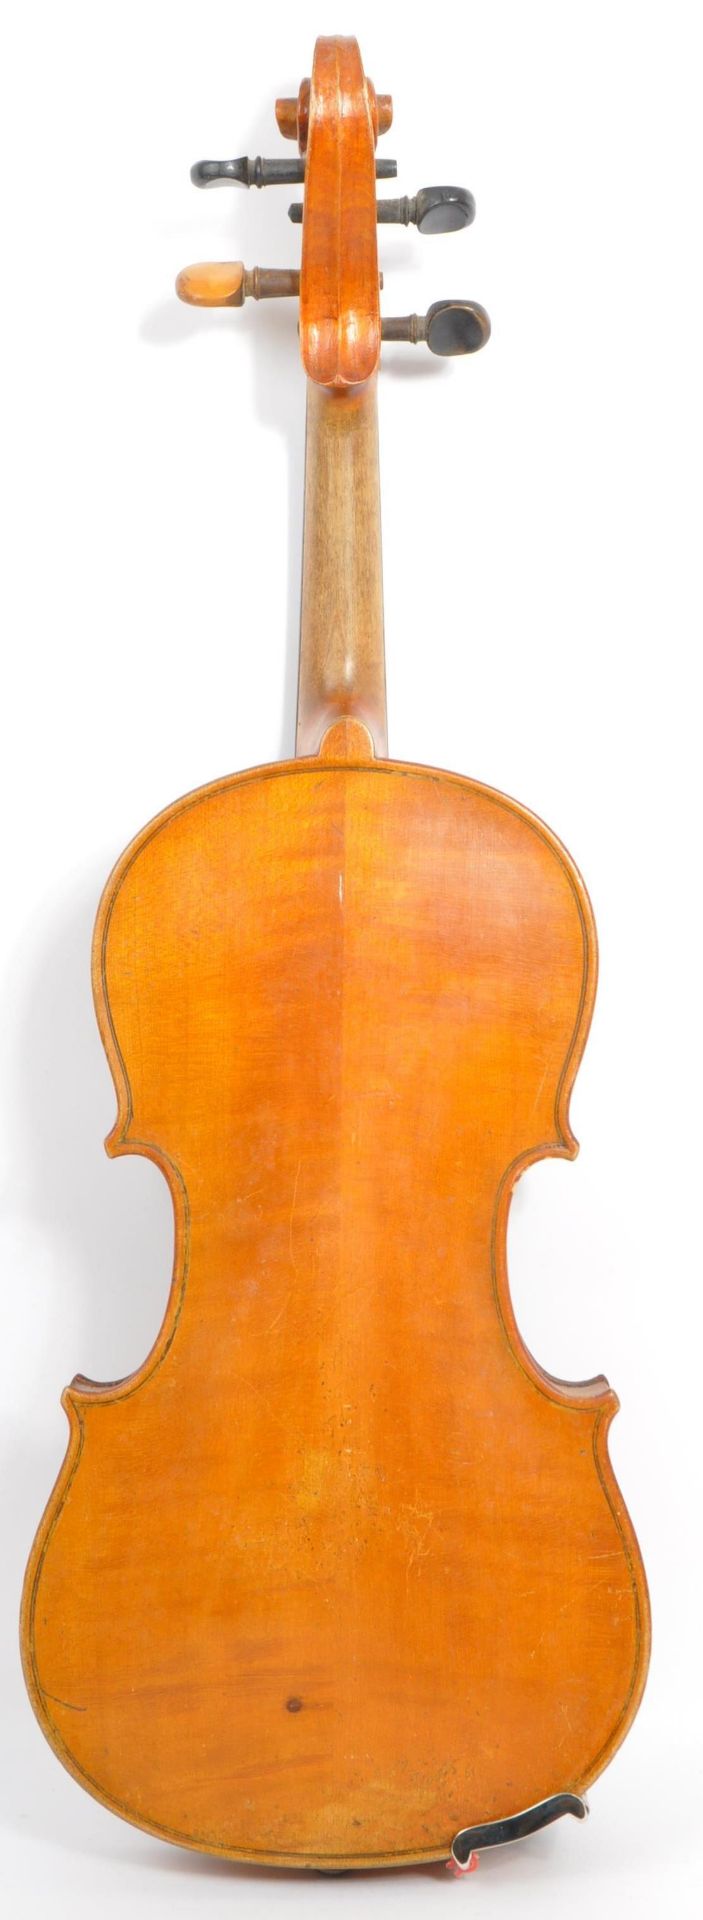 LATE 19TH CENTURY TWO PIECE BACK VIOLIN 3/4 SIZE WITH BOW - Image 3 of 6